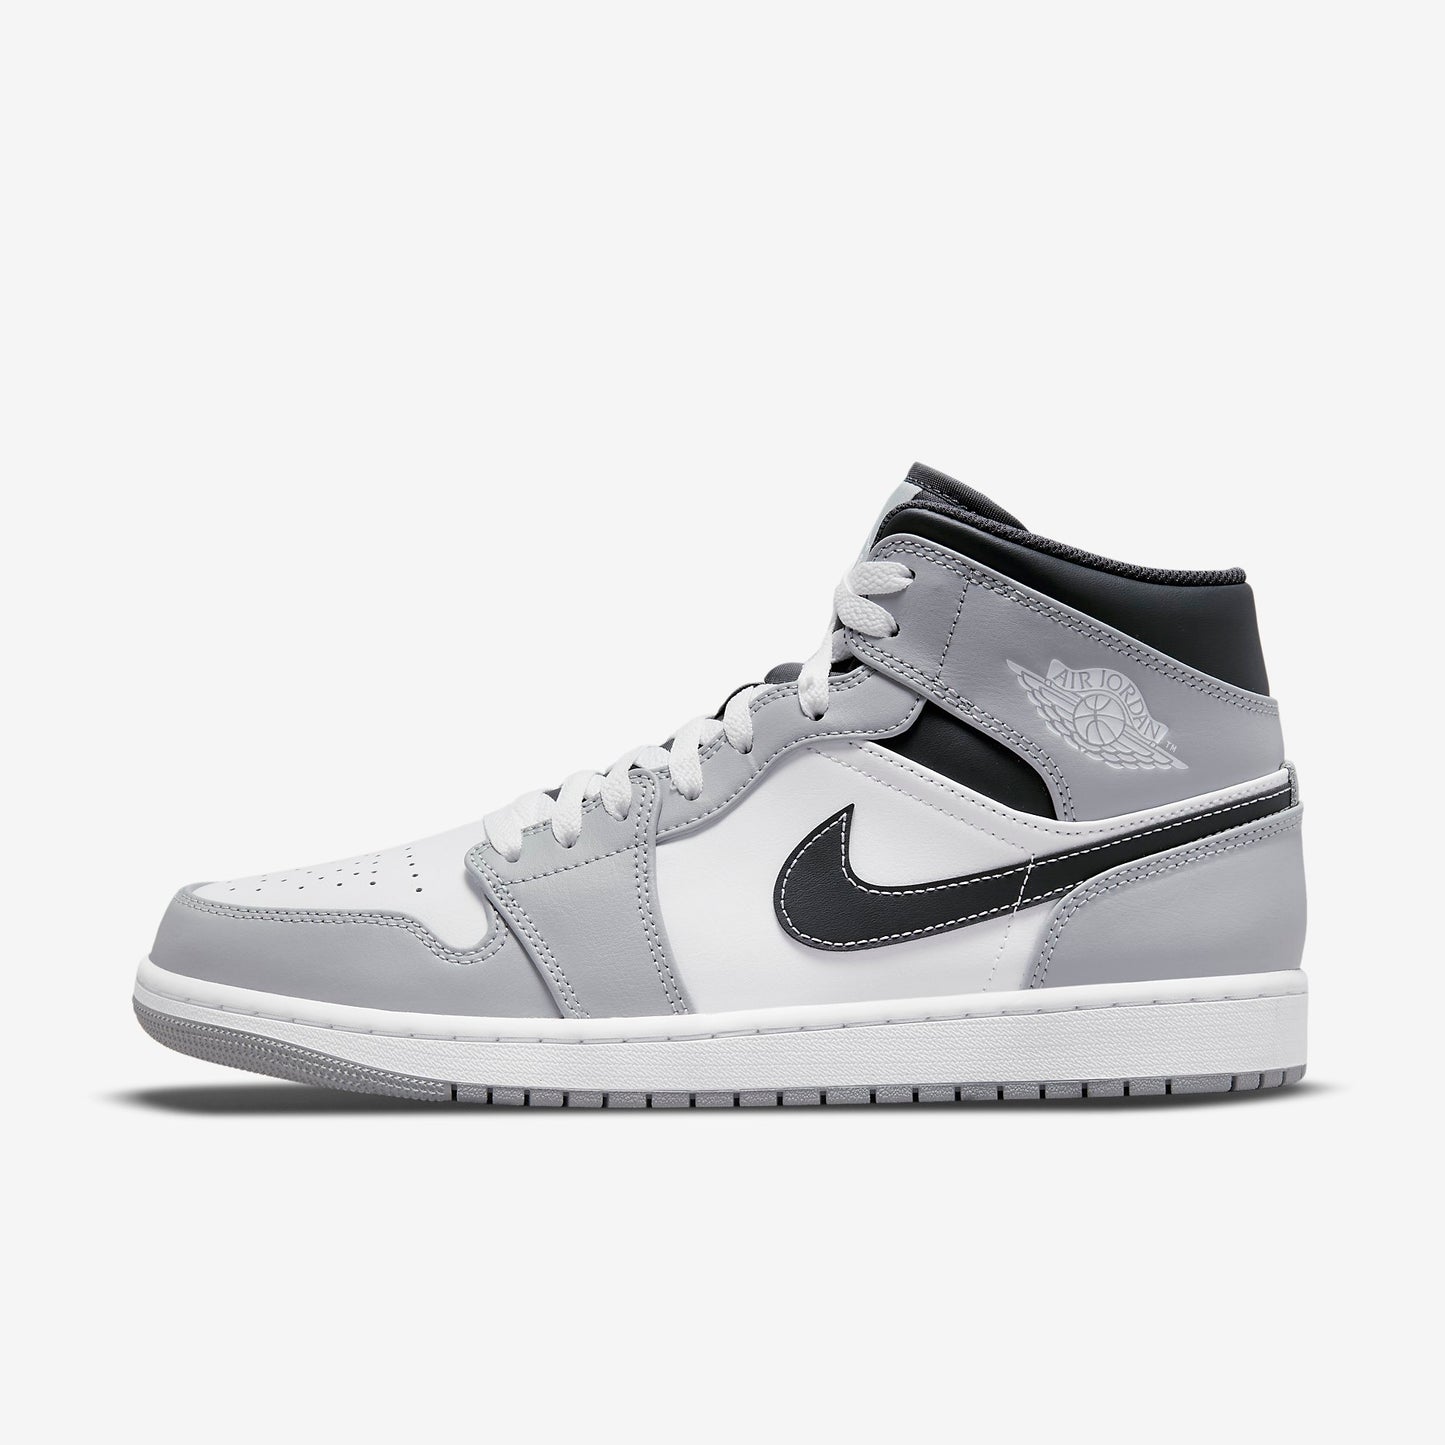 Air Jordan 1 Mid Anthracite - Lit Fitters Portugal